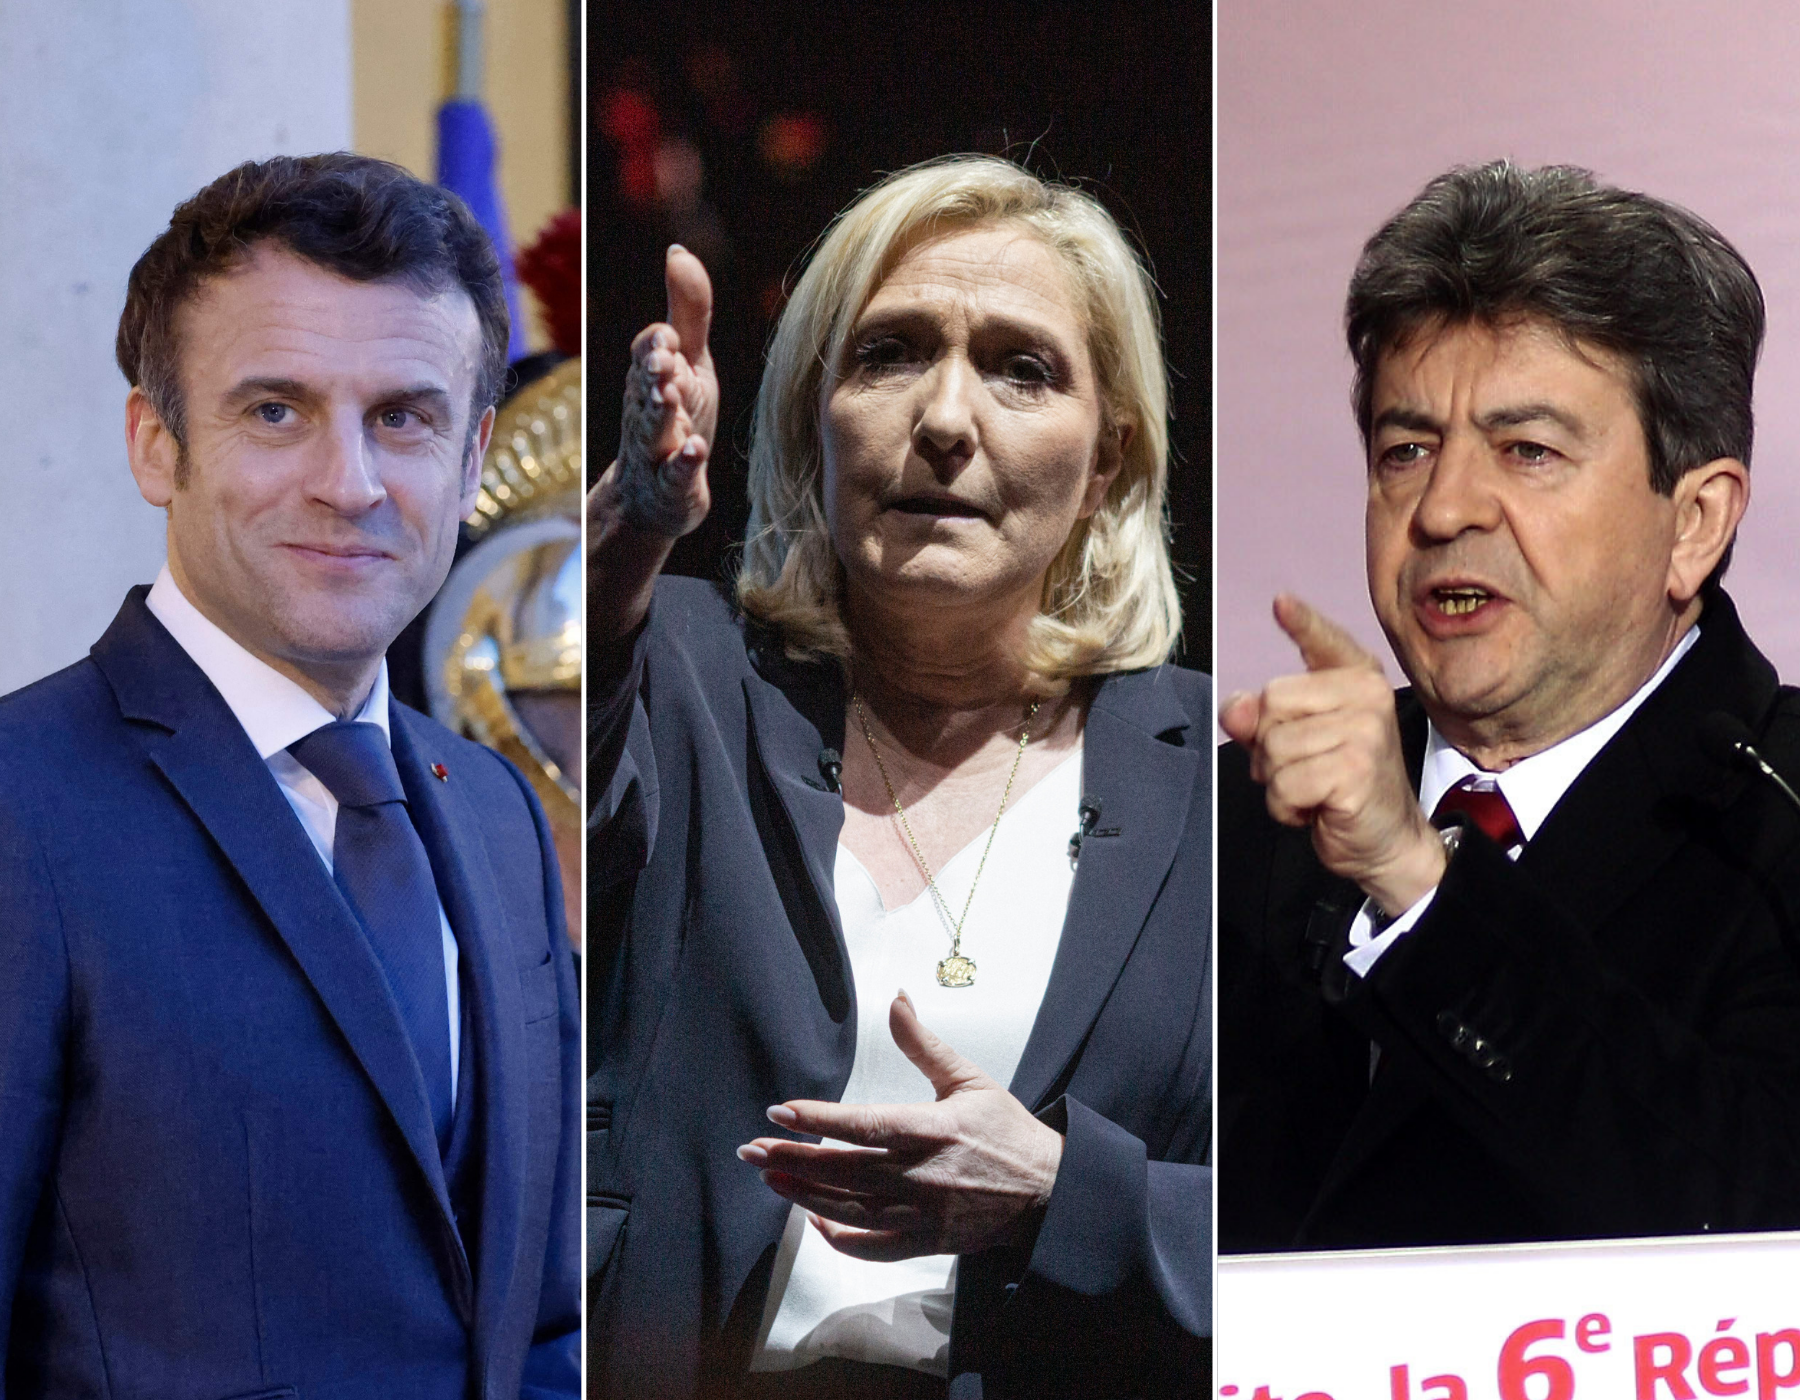 Having apparently drawn so many votes from the mainstream left and right in the first round, Macron needs a slice of the Mélenchon vote to win. And this is where things could go wrong